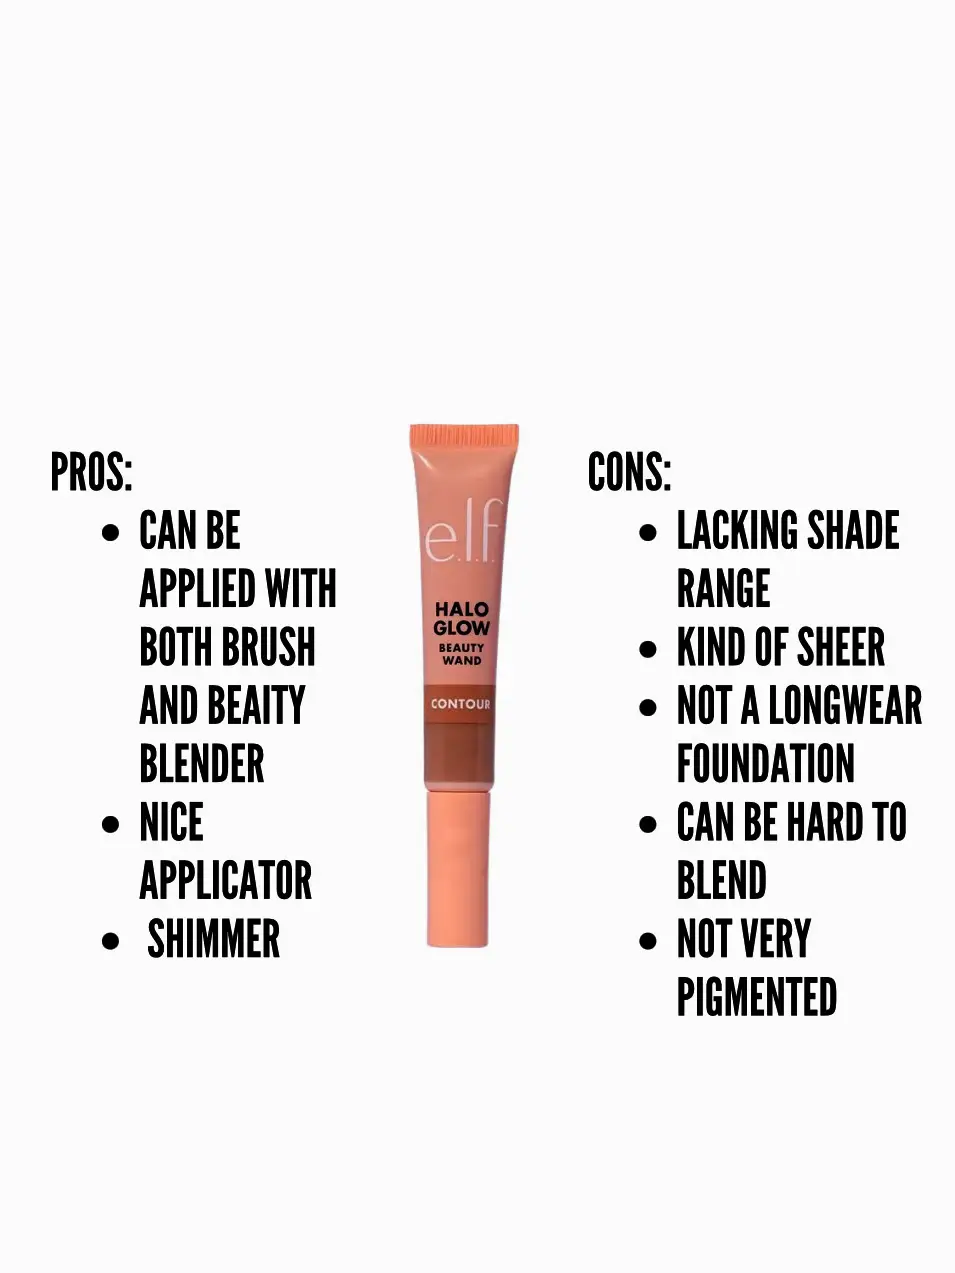 e.l.f. cosmetics Halo Glow Contour Beauty Wand (Ingredients Explained)